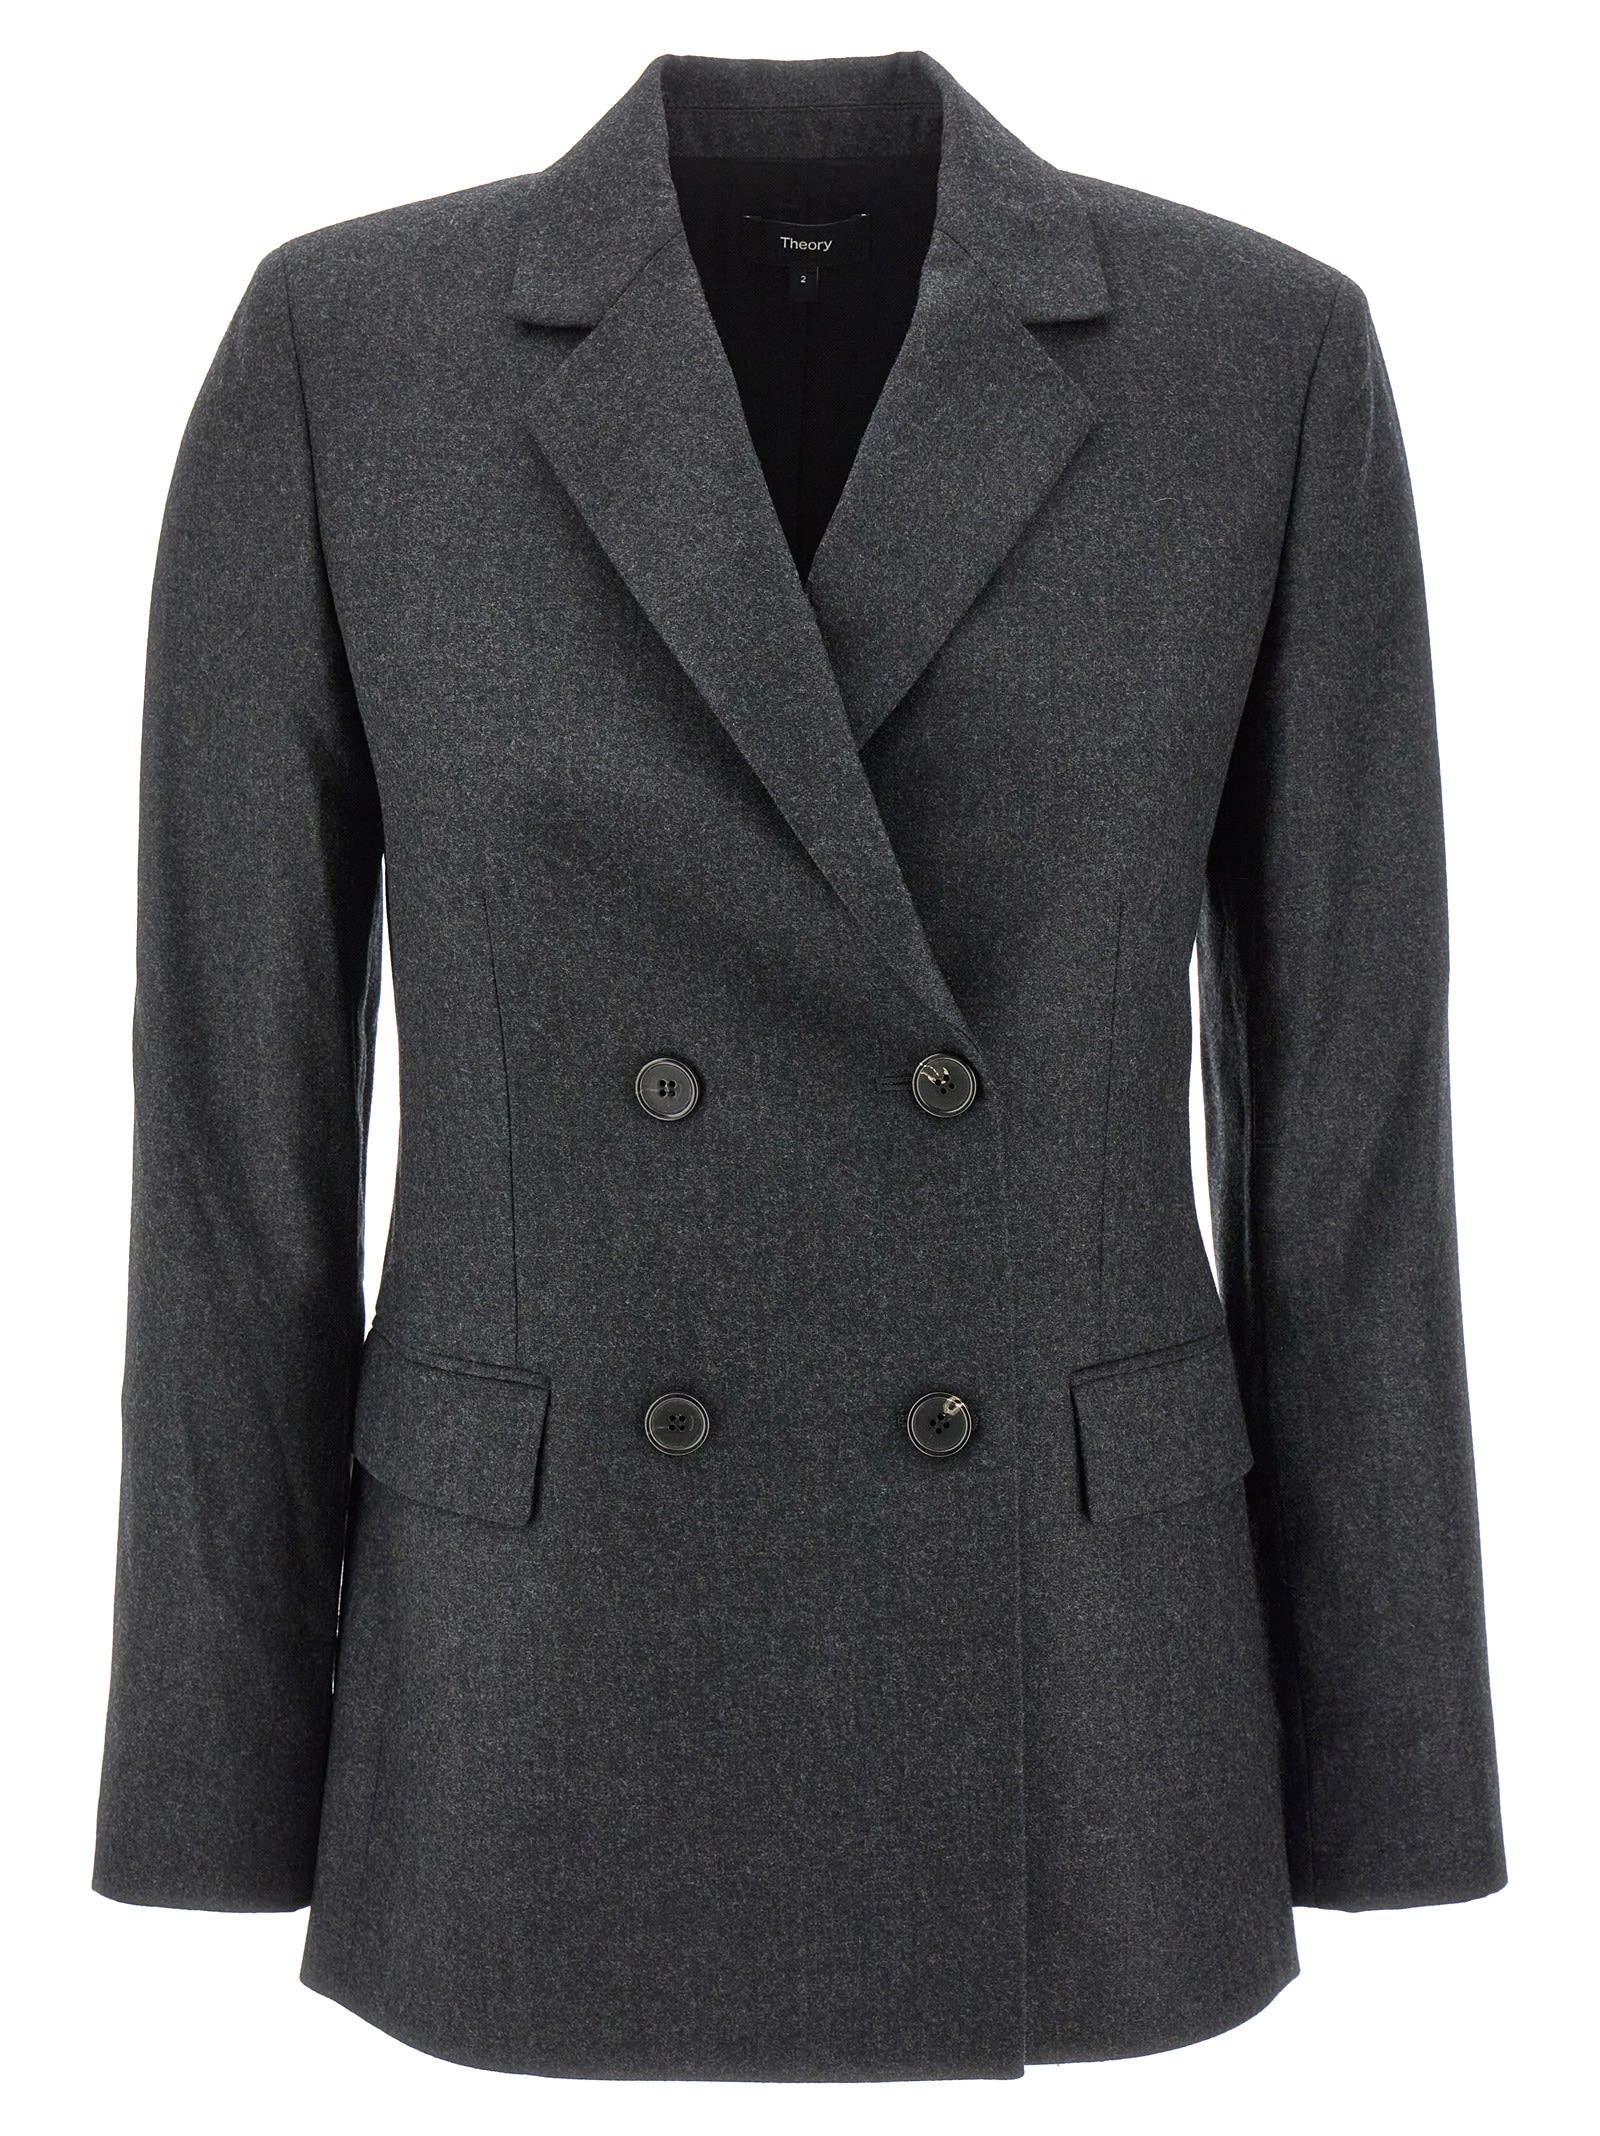 THEORY DOUBLE-BREASTED WOOL BLAZER